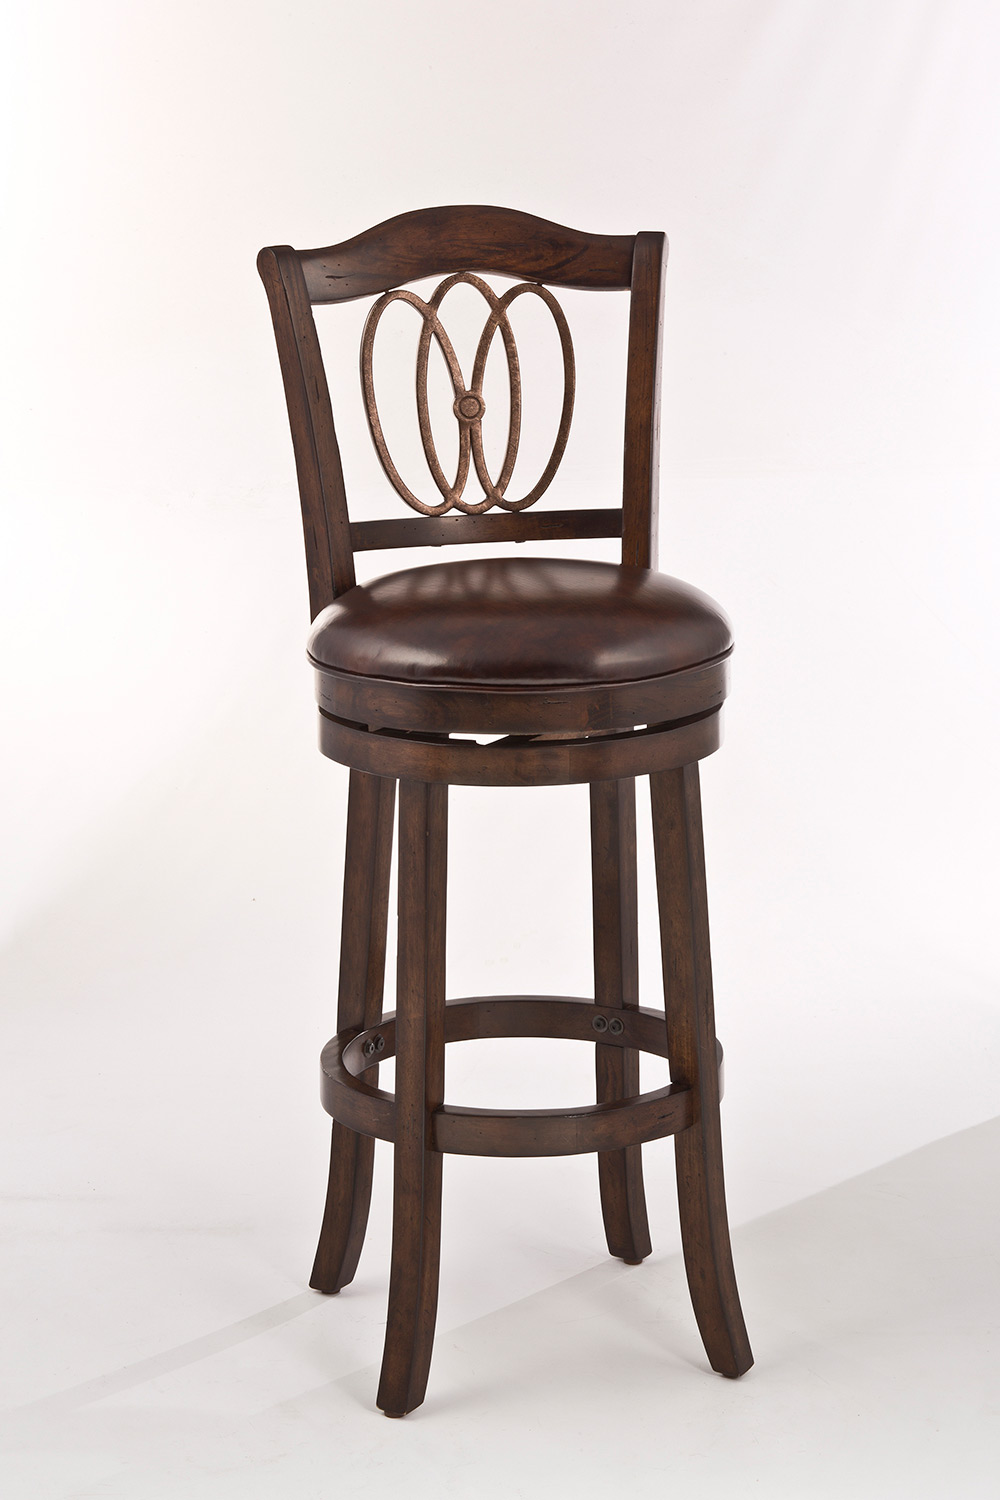 Hillsdale Lyndale Swivel Bar Stool - Distressed Chestnut - Brown Faux Leather